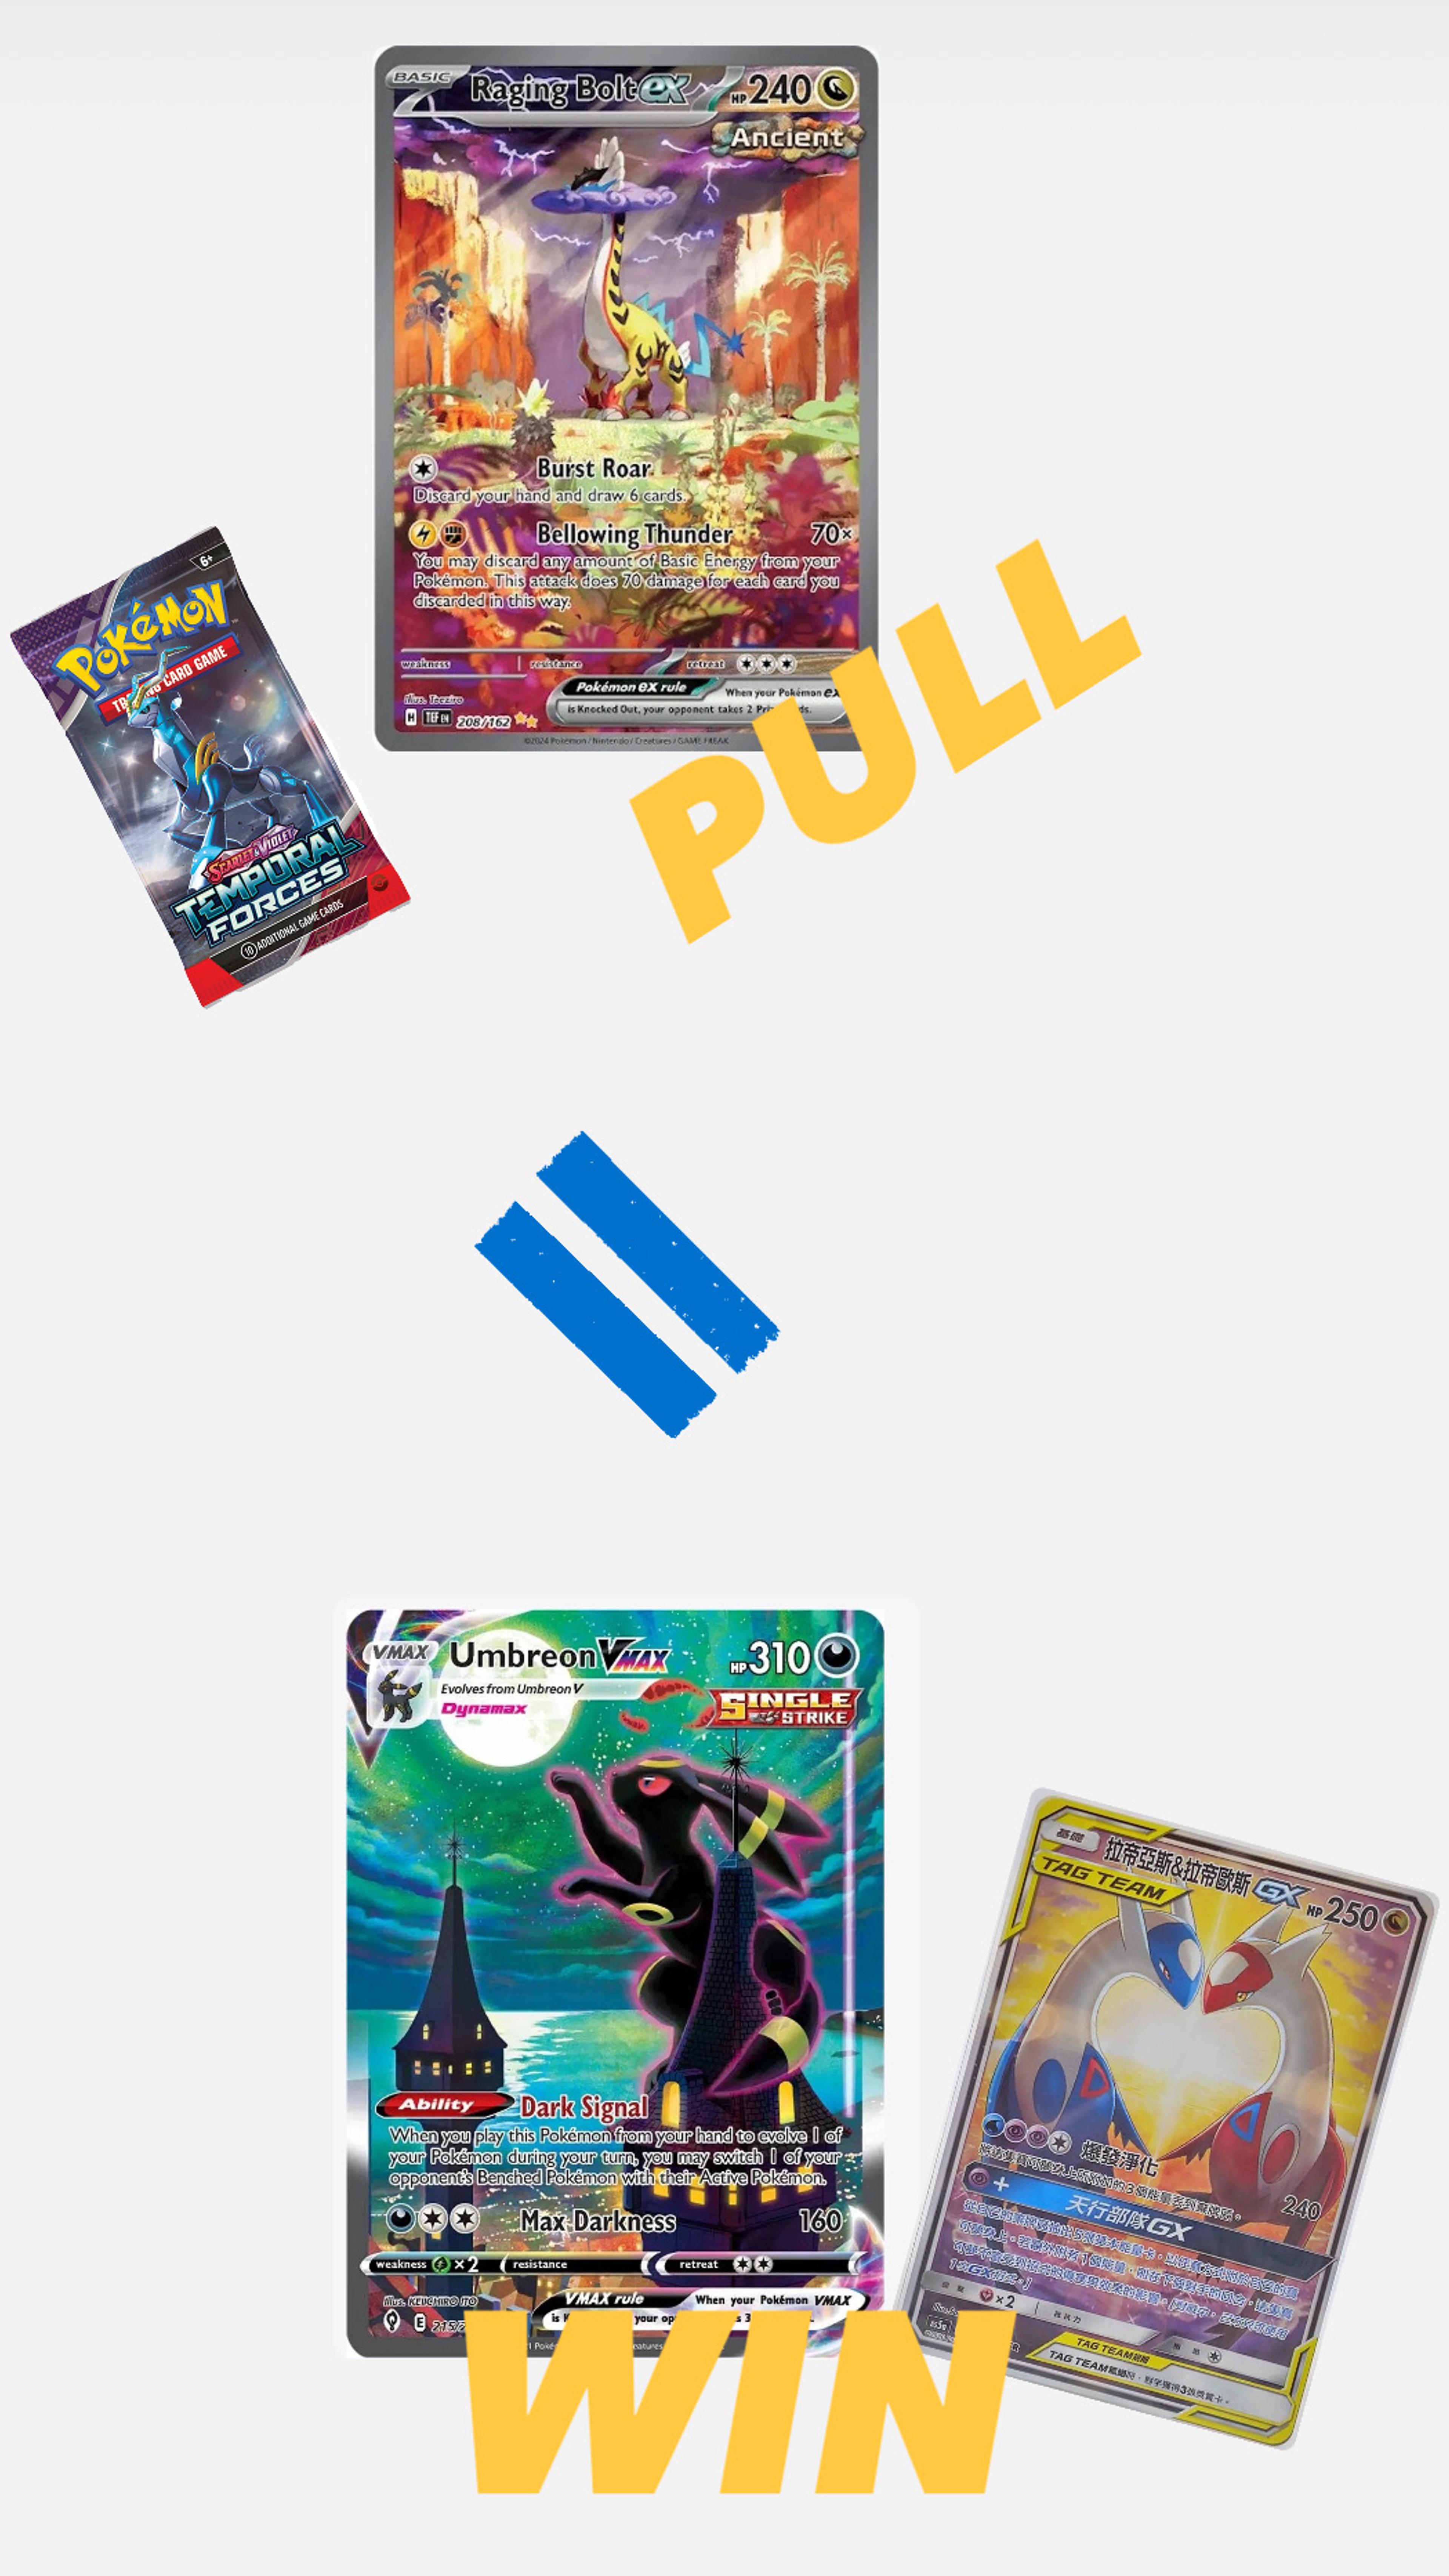 Preview image for the show titled "Craftii: WIN UMBREON VMAX ALT! TCG & MORE!" at Today @ 3:30 AM